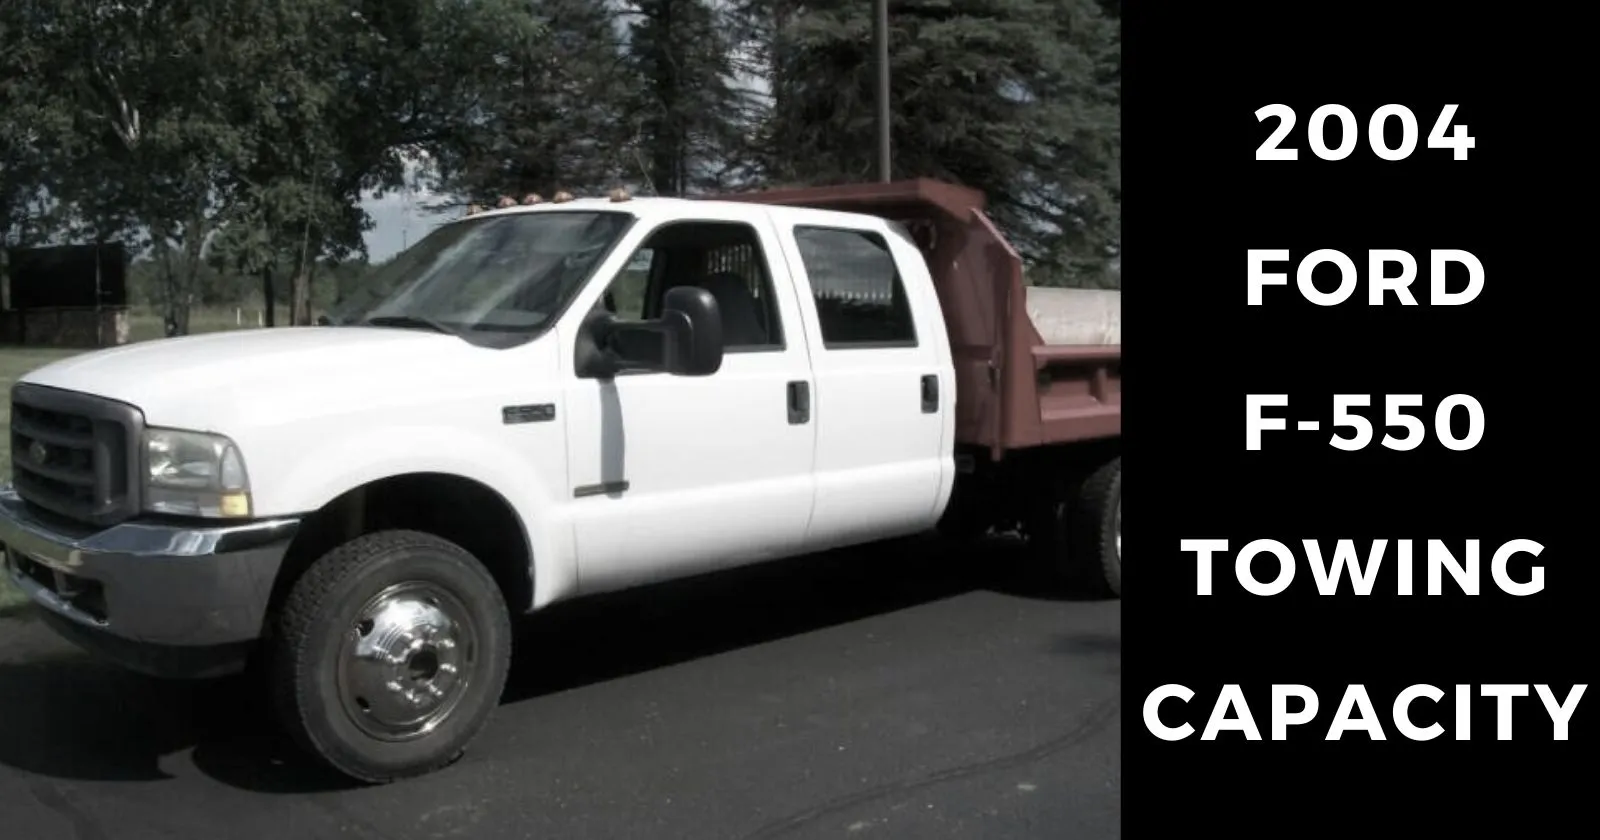 2004-ford-f550-towing-capacity-with-charts-thecartowing